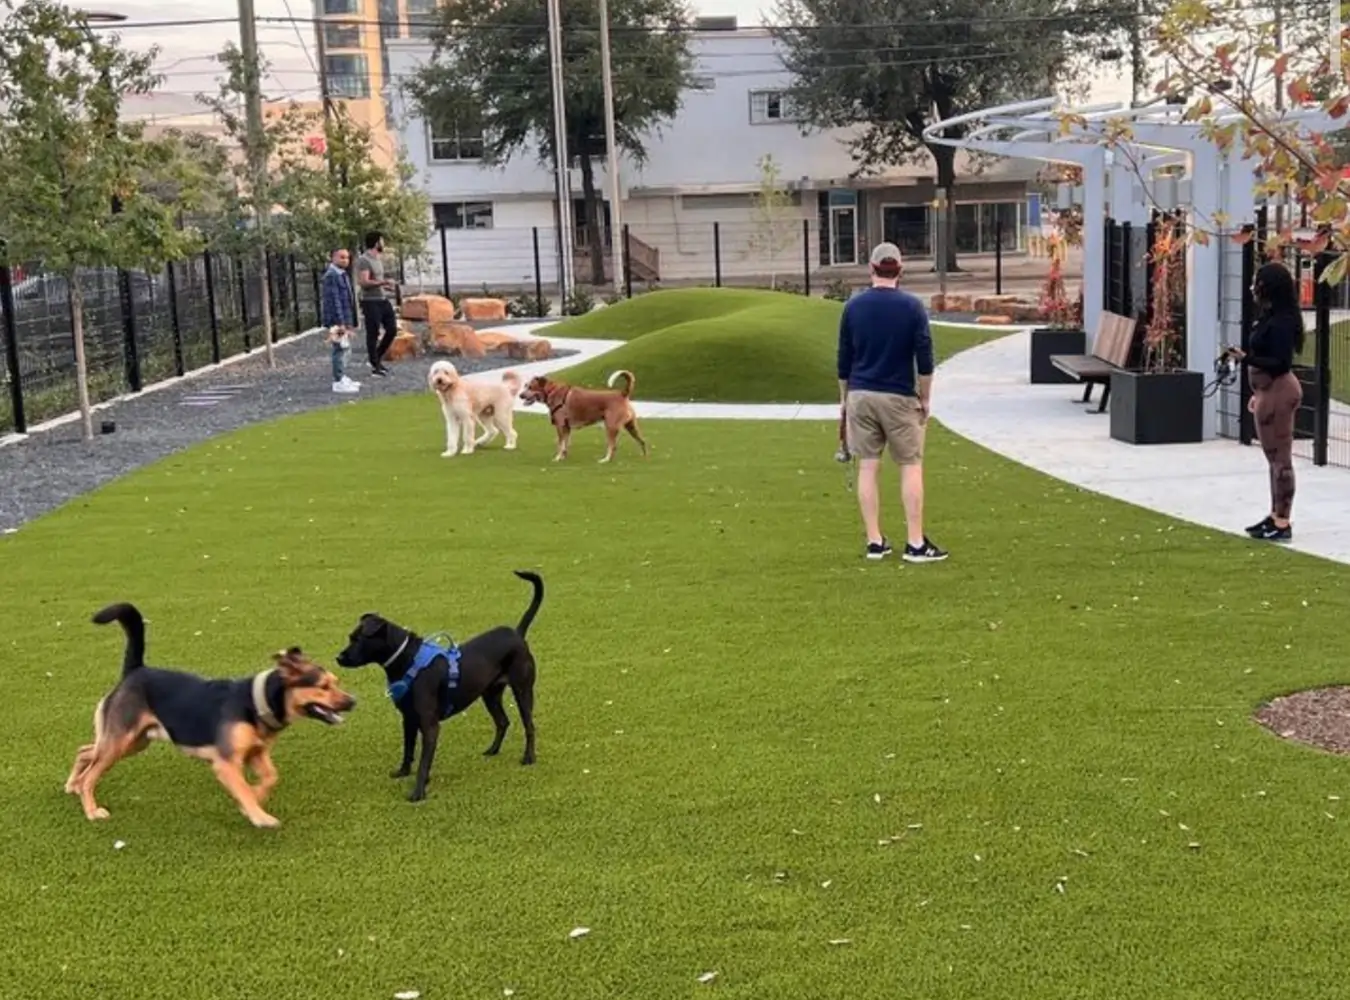 Artificial grass dog park installed by SYNLawn